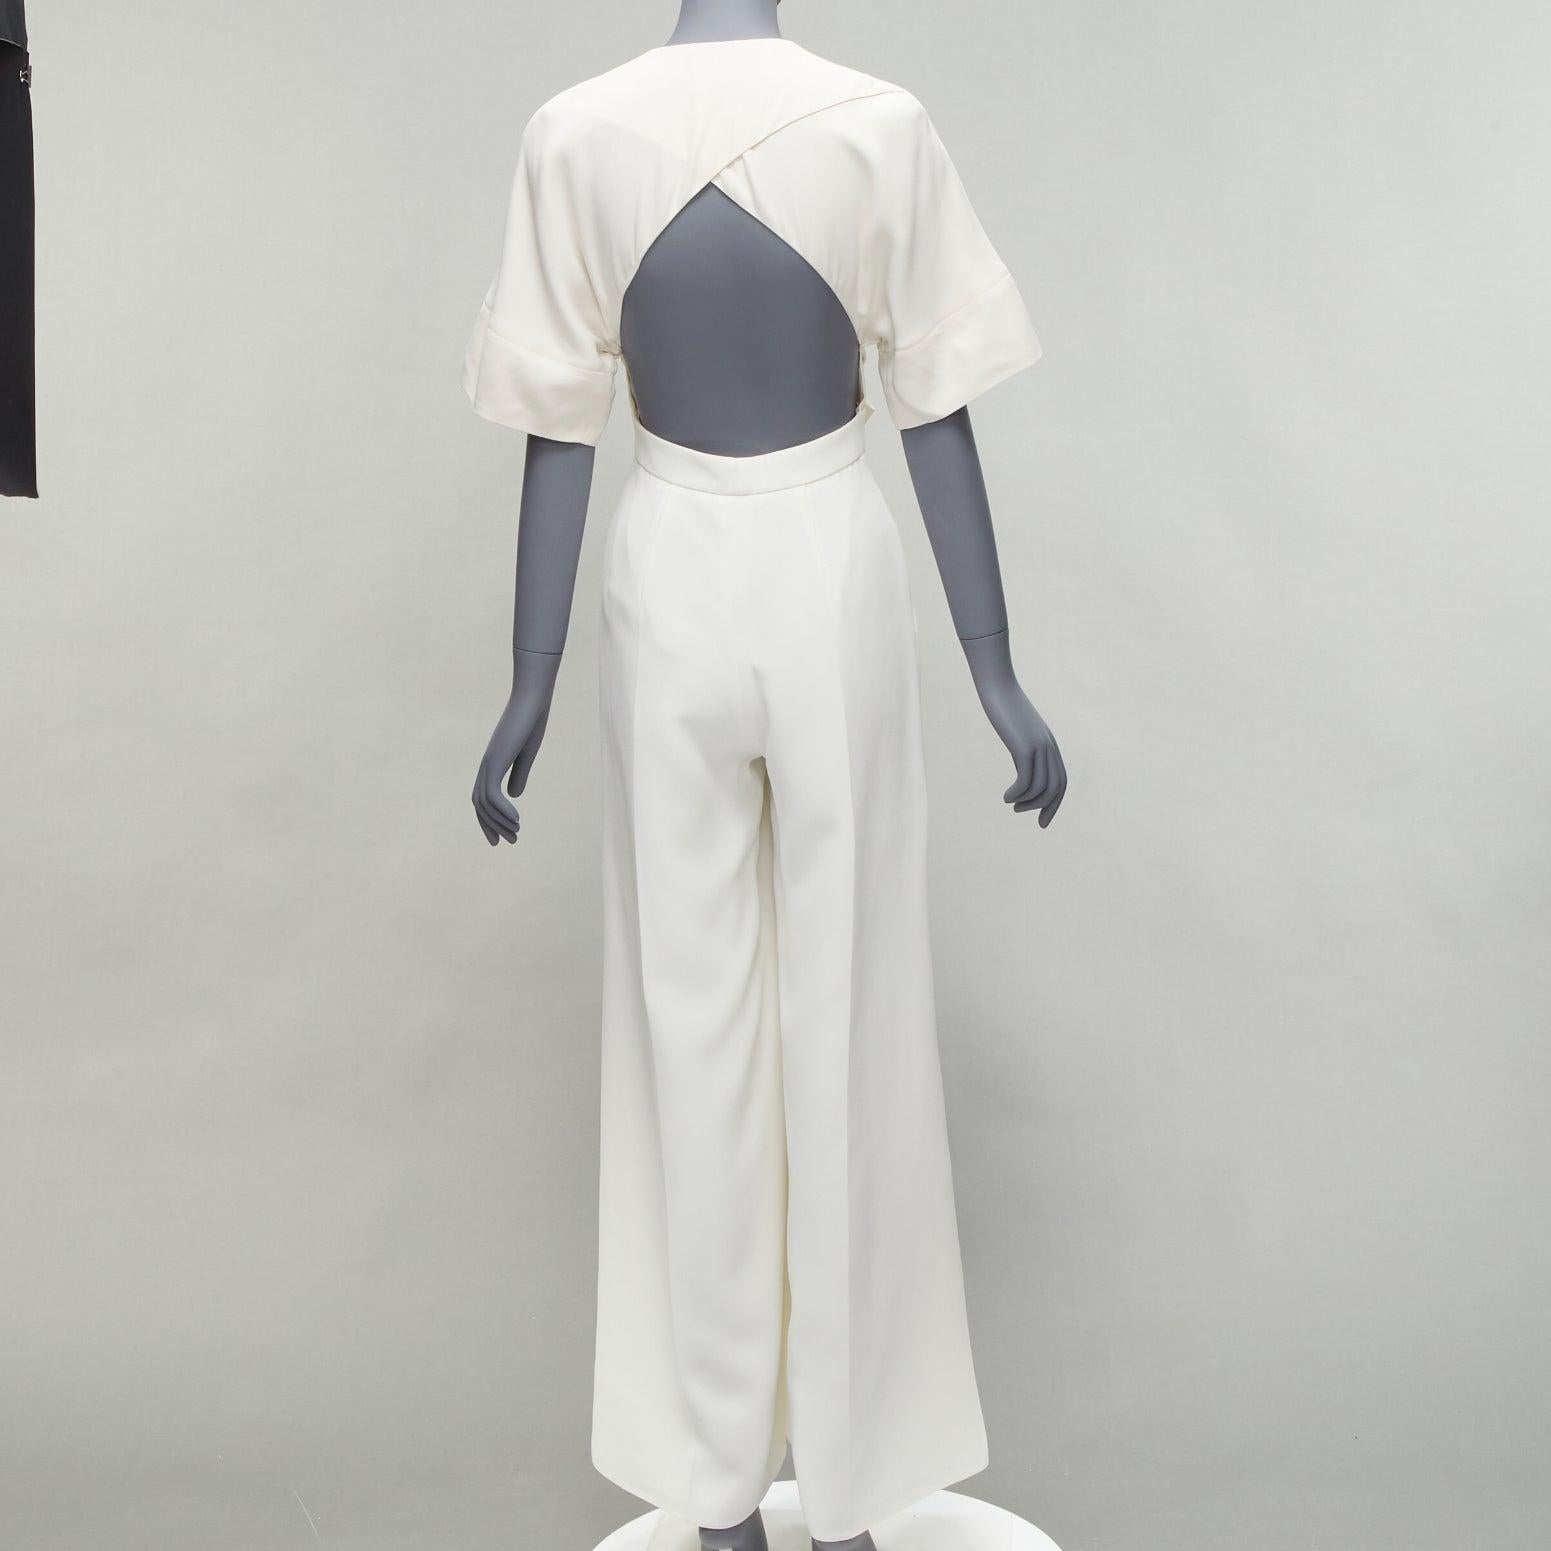 ROKSANDA white backless front tie wide leg jumpsuit UK6 XS
Reference: LNKO/A02166
Brand: Roksanda
Material: Silk, Blend
Color: White
Pattern: Solid
Closure: Zip
Lining: White Silk
Extra Details: Front invisible zip. Backless design.
Made in: